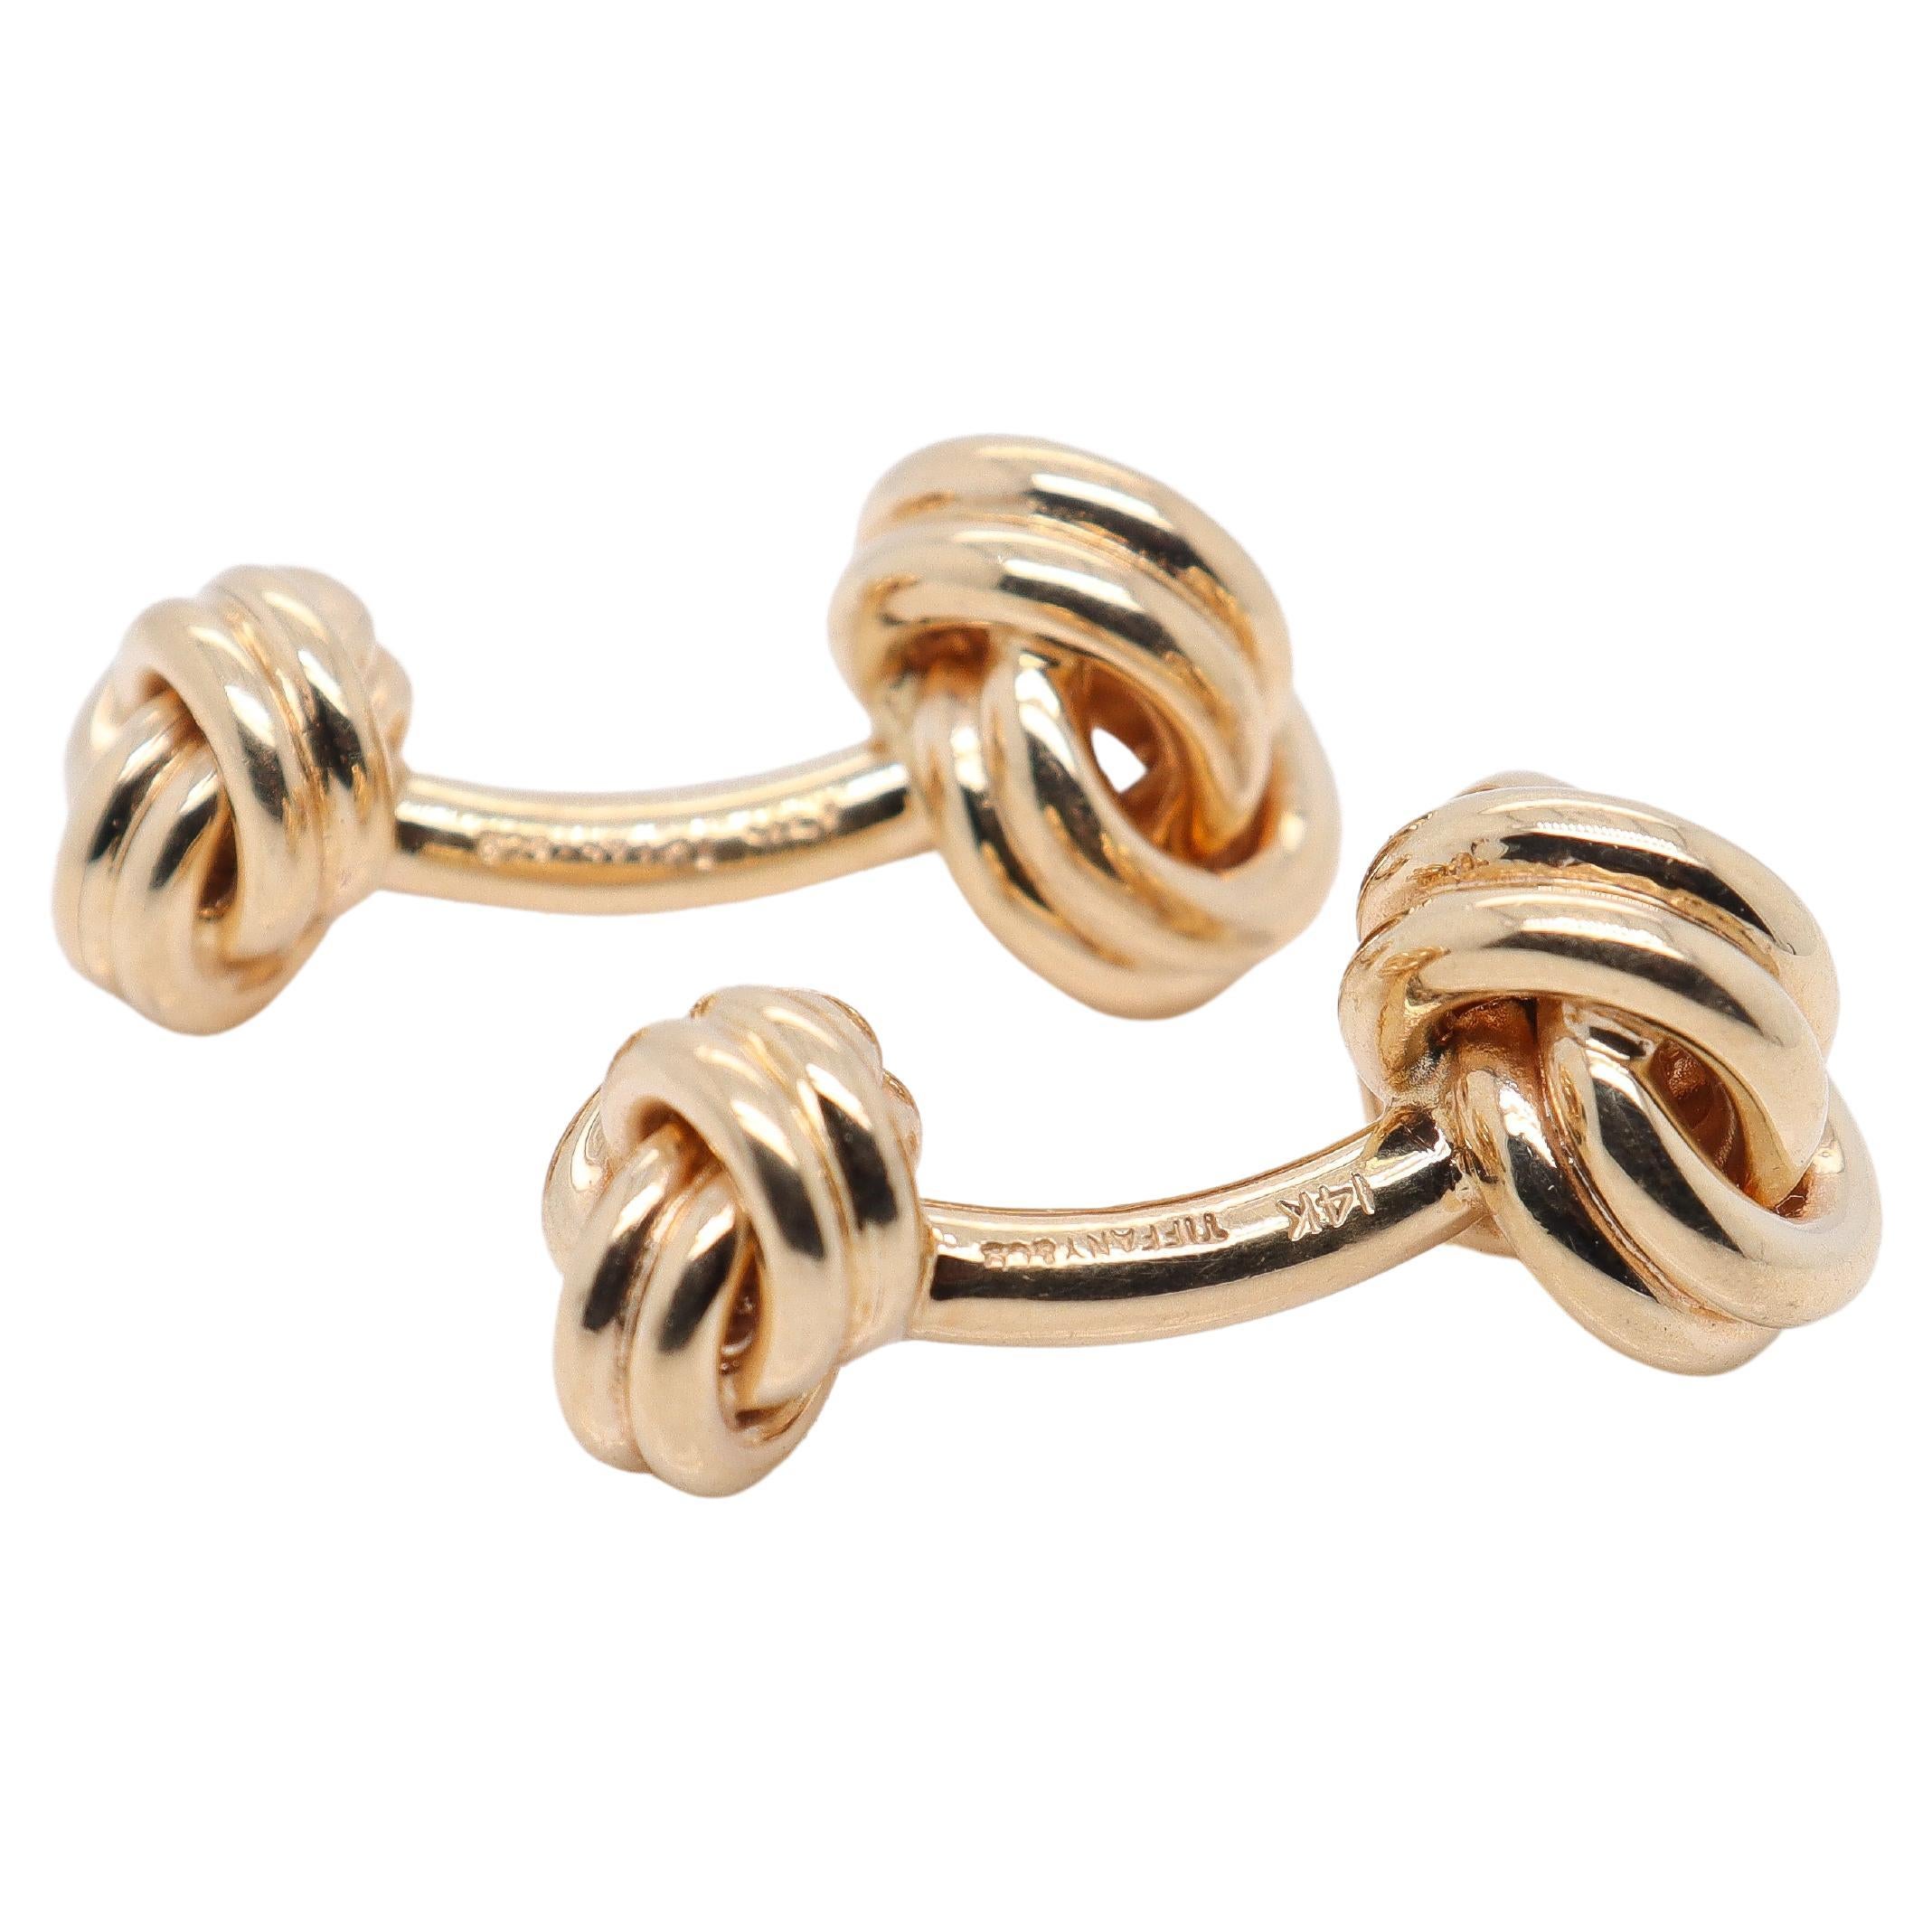 Pair of Tiffany & Co. 14k Gold Double Love Knot Cufflinks